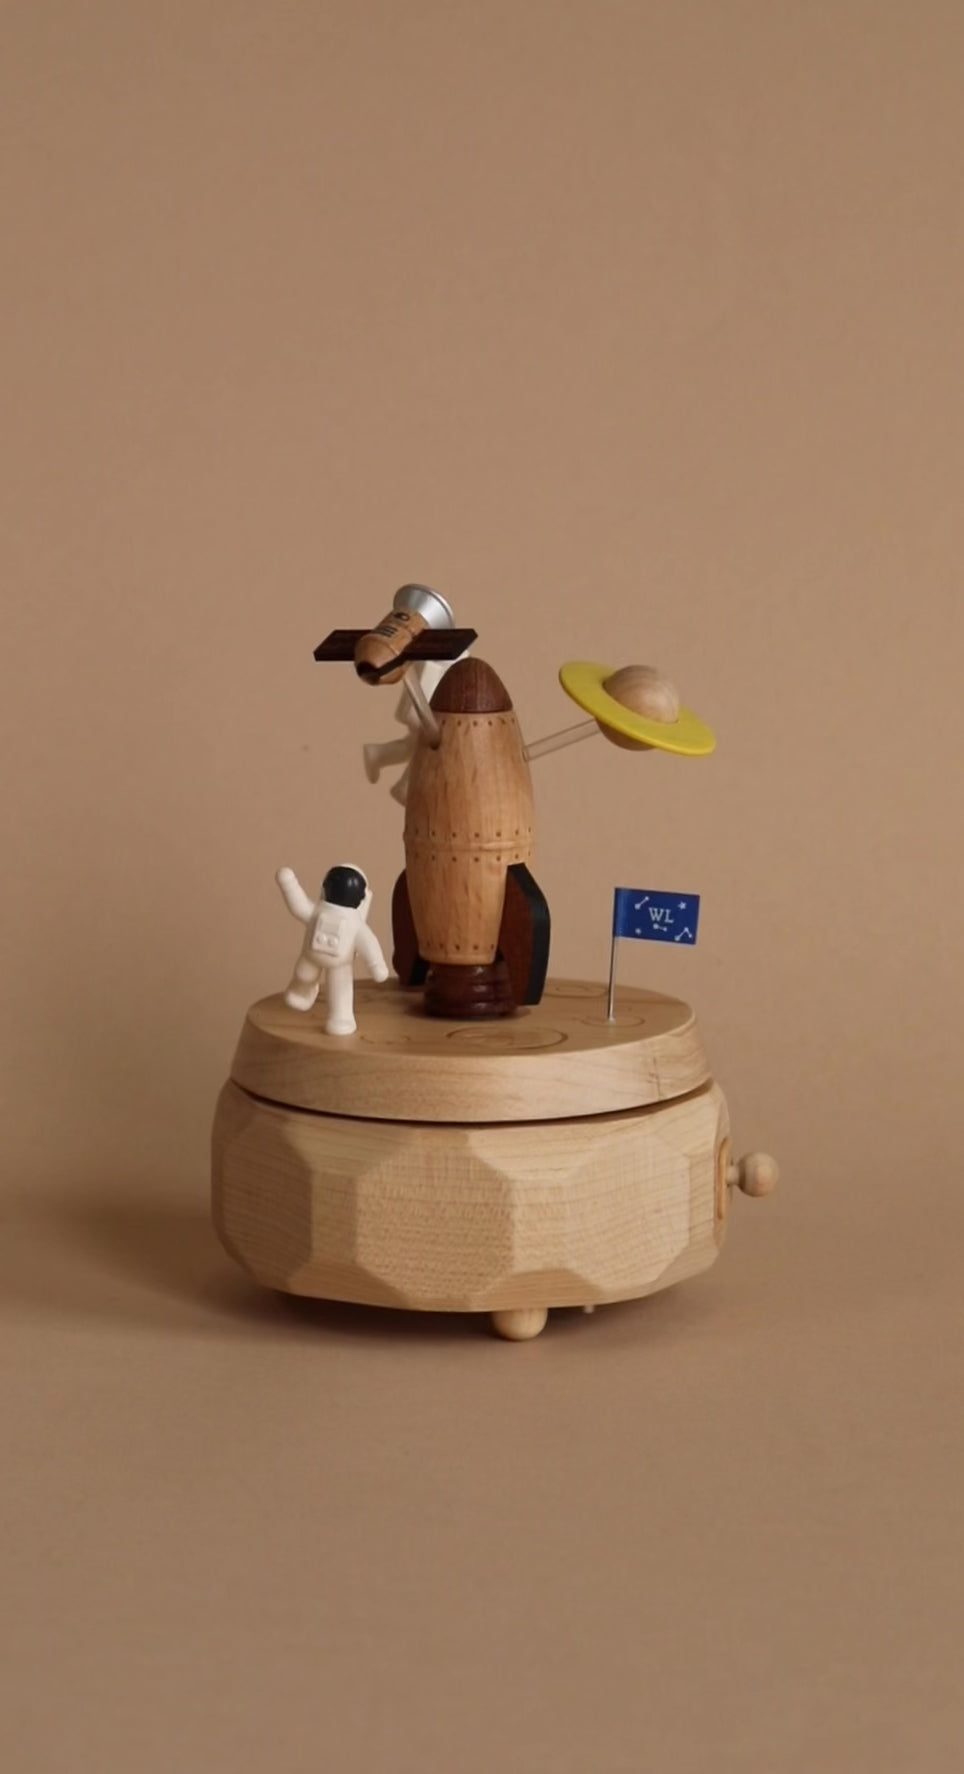 Space themed wooden music box with a rocket in the middle and astronauts and spaceships going around it. 